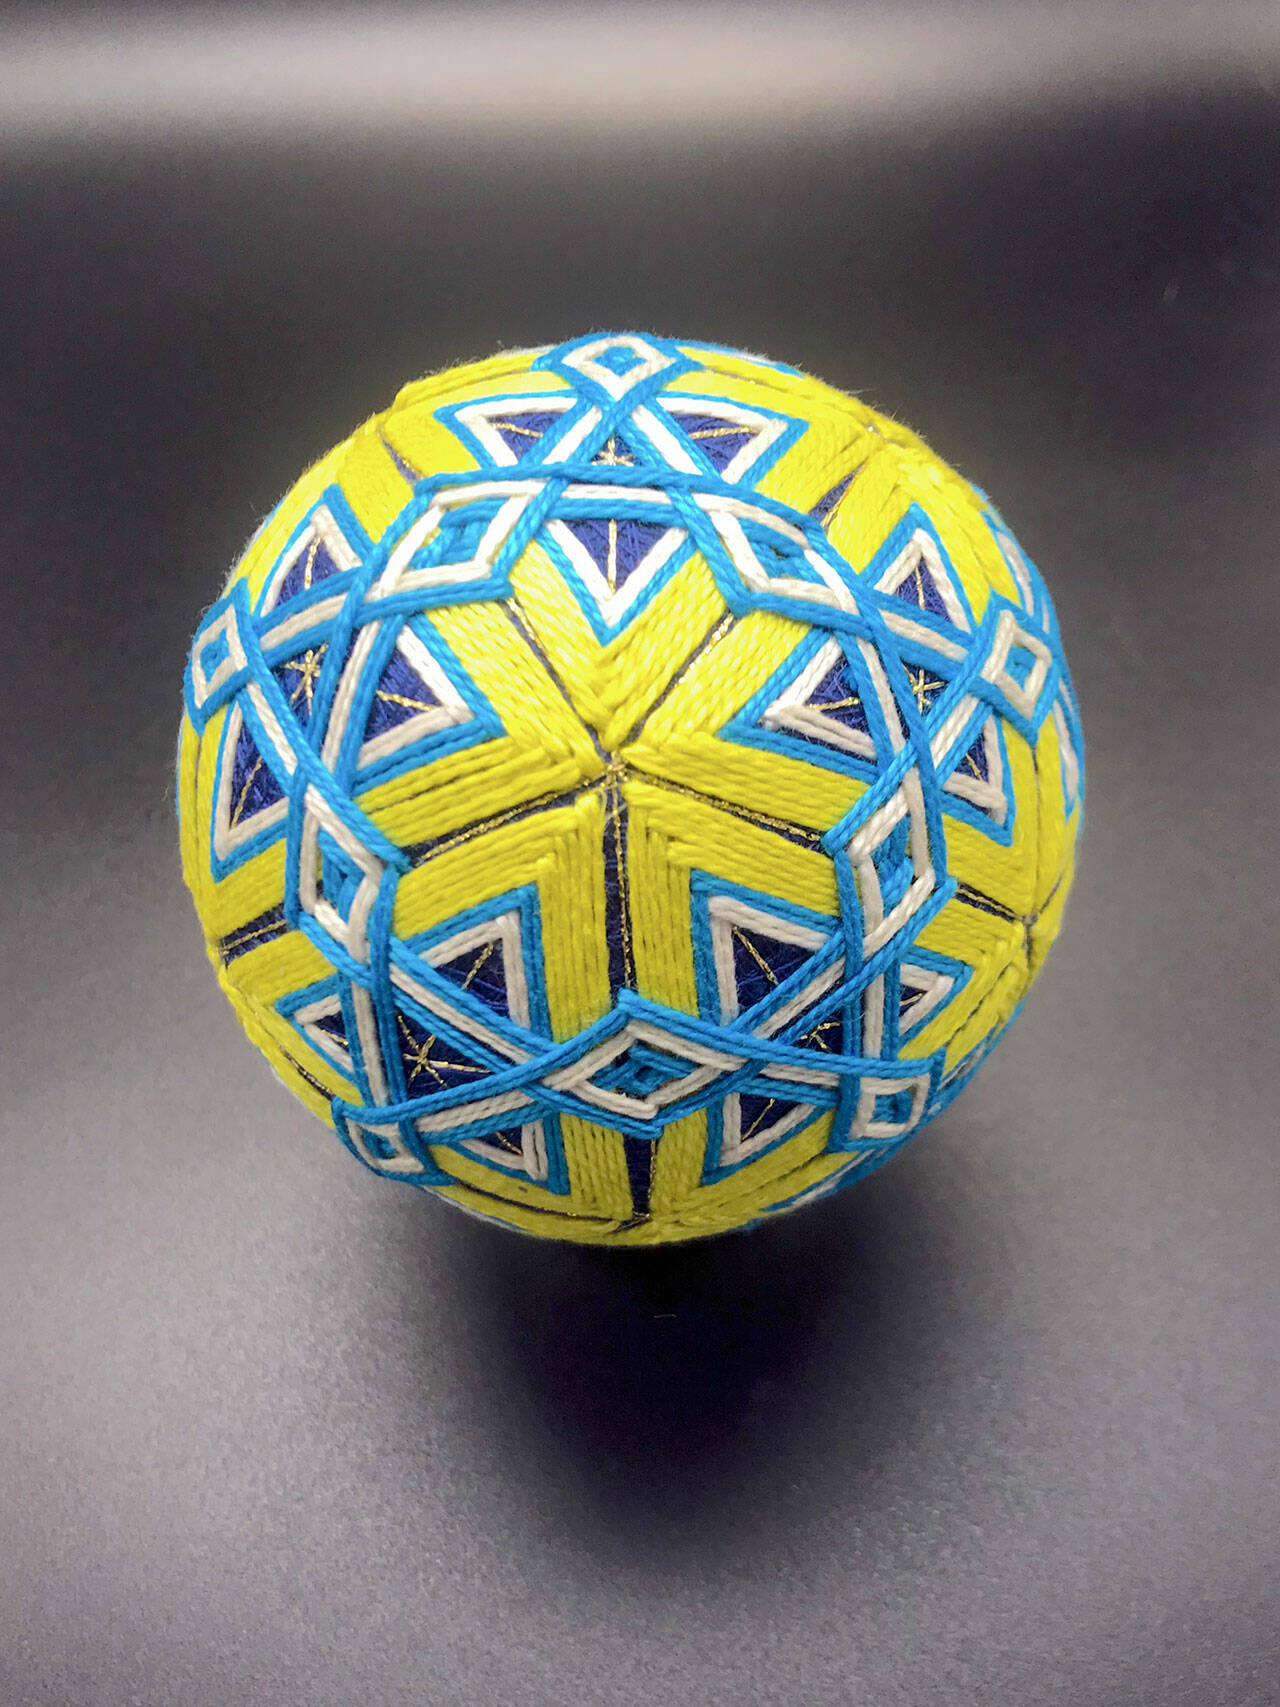 Rebekah Cadorette’s collection of Temari at Port Townsend Gallery is inspired by Ukraine’s pysanky Easter eggs.